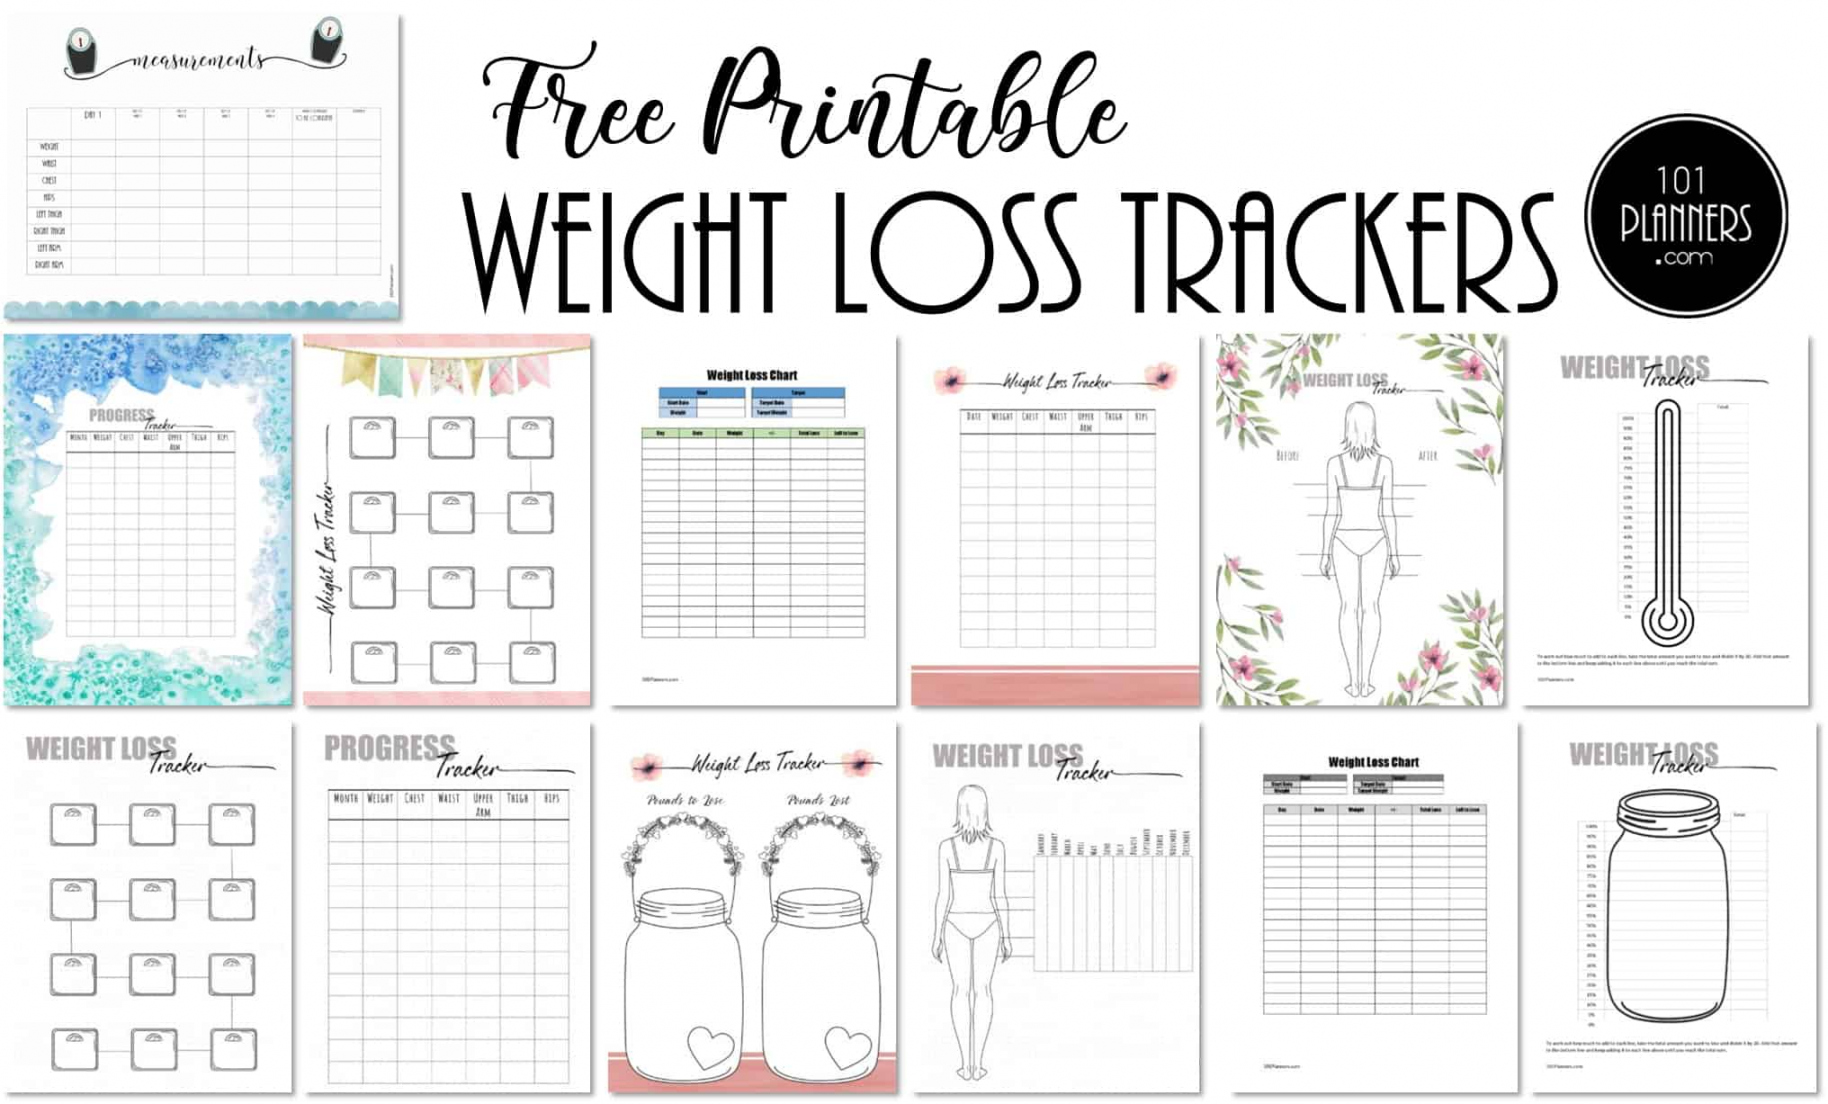 FREE Weight Loss Tracker Printable  Customize before you Print - FREE Printables - Free Printable Weight Loss Chart